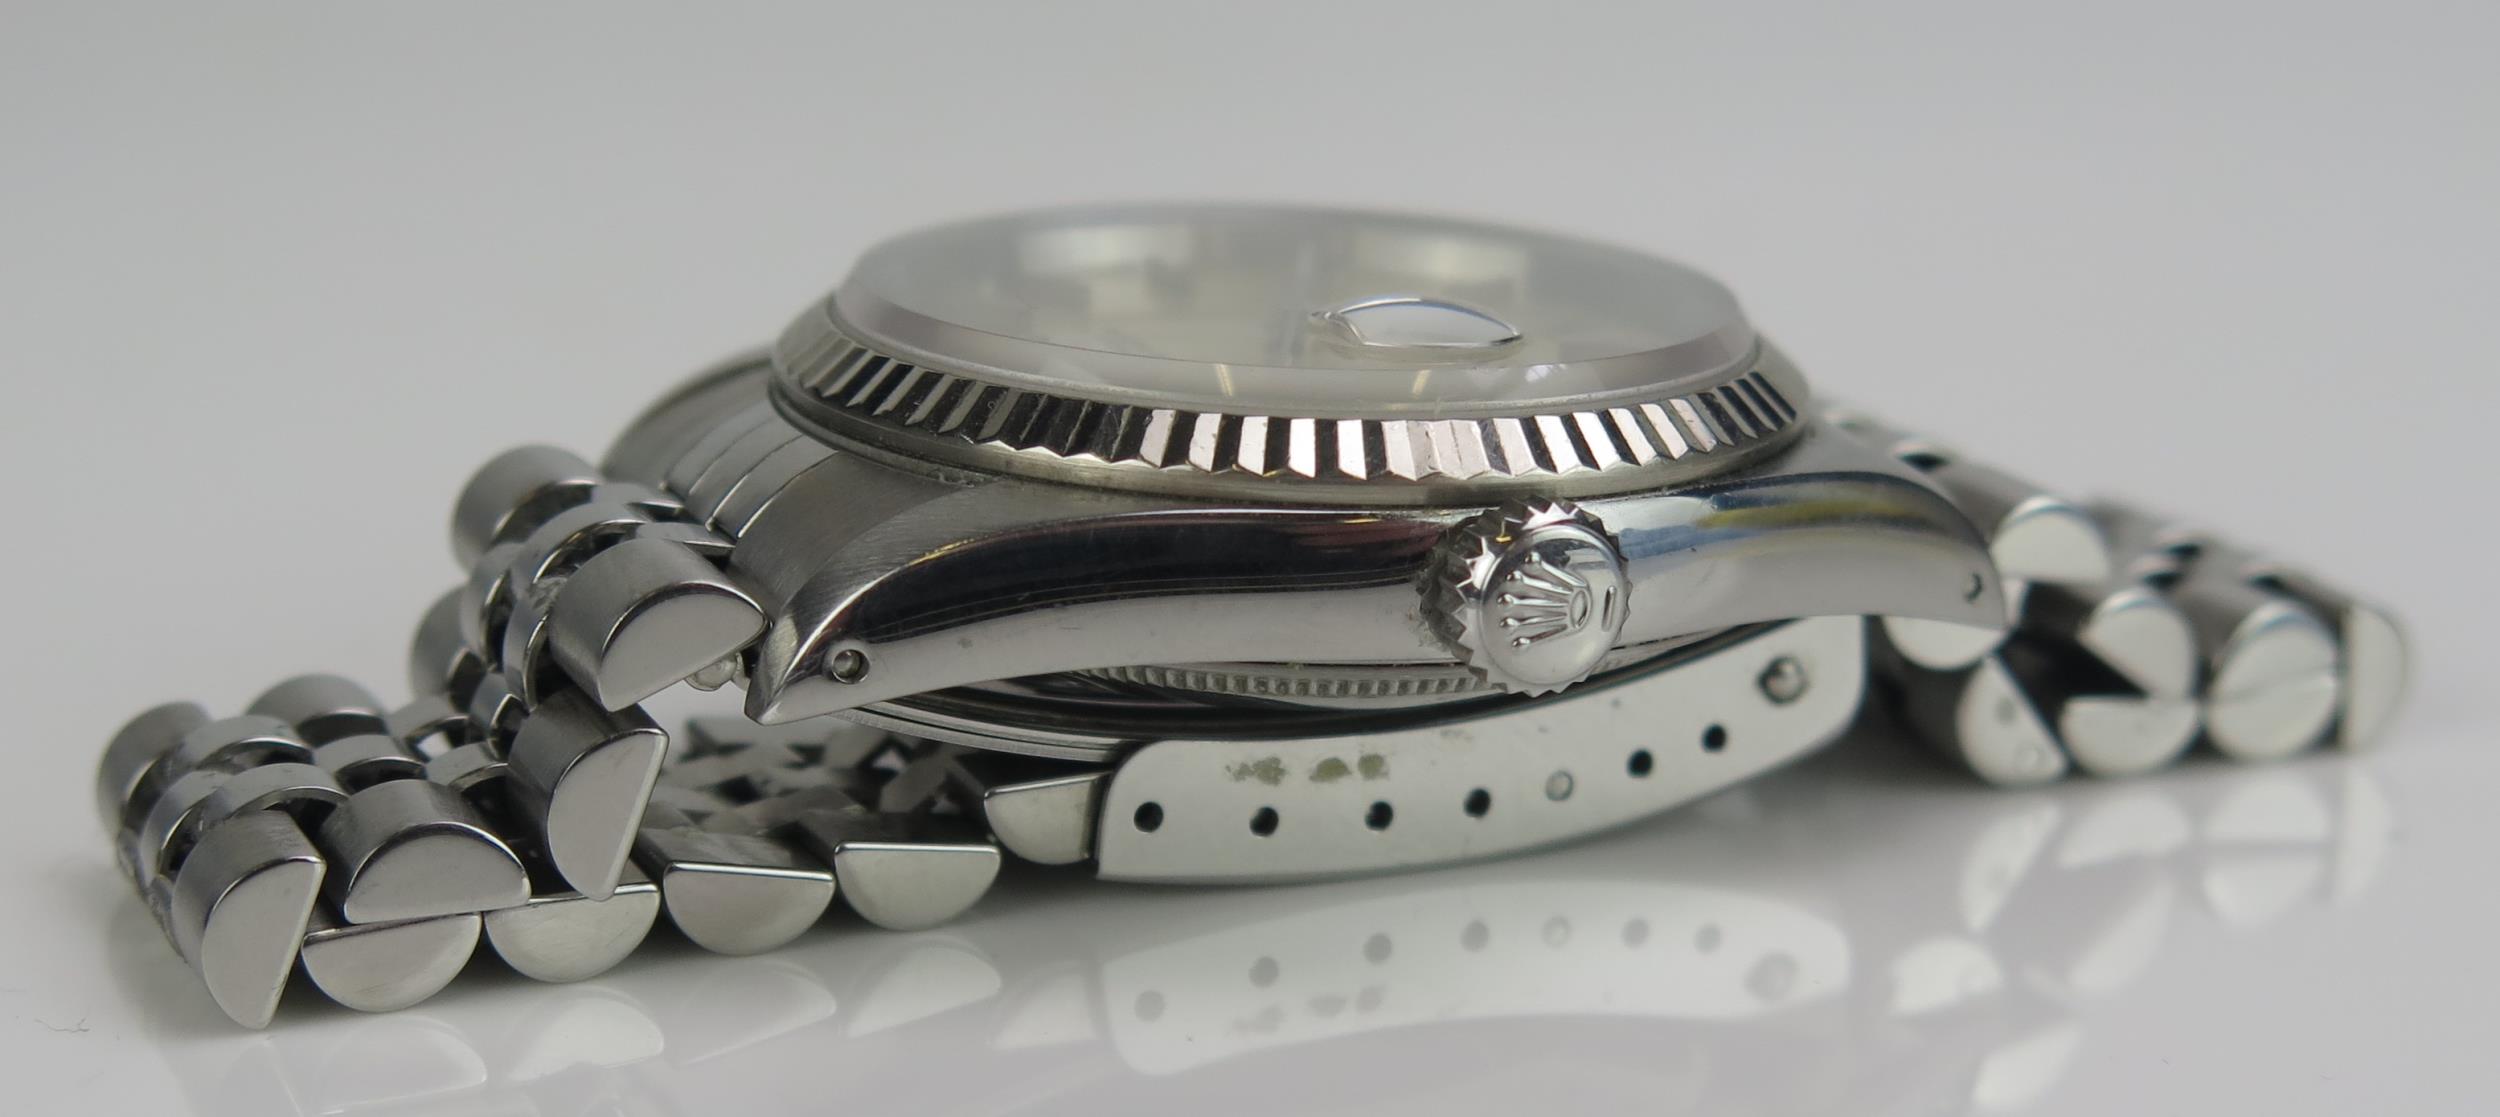 A ROLEX Gent's Oyster Perpetual Datejust S.C.O.C. Steel Cased Wristwatch on a 63600 Jubilee Bracelet - Image 7 of 10